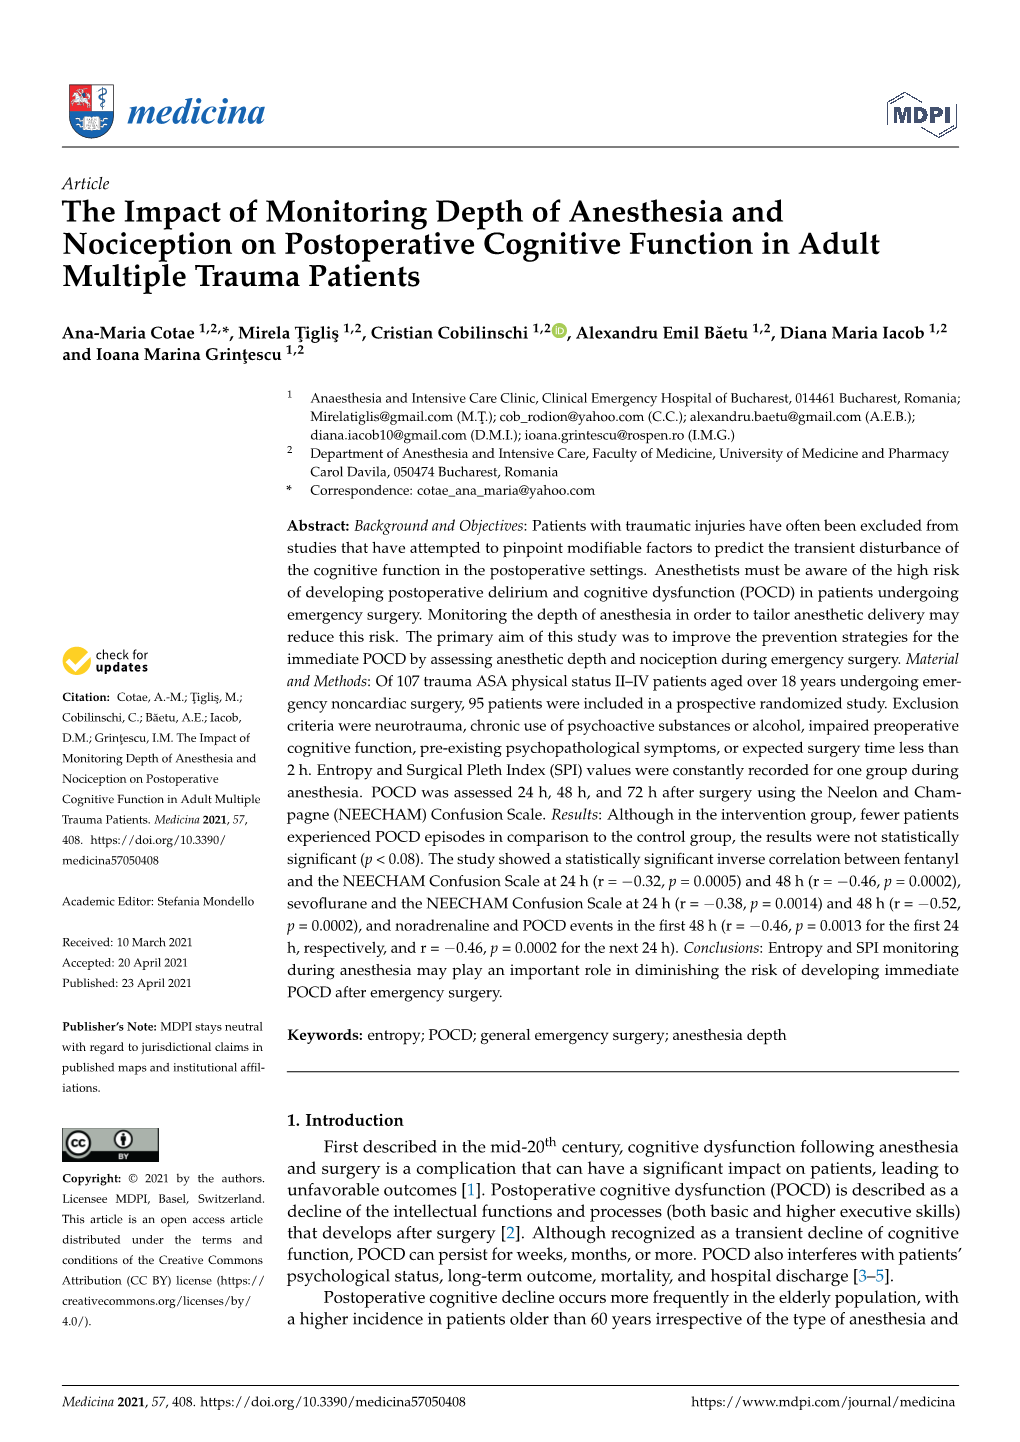 The Impact of Monitoring Depth of Anesthesia and Nociception on Postoperative Cognitive Function in Adult Multiple Trauma Patients